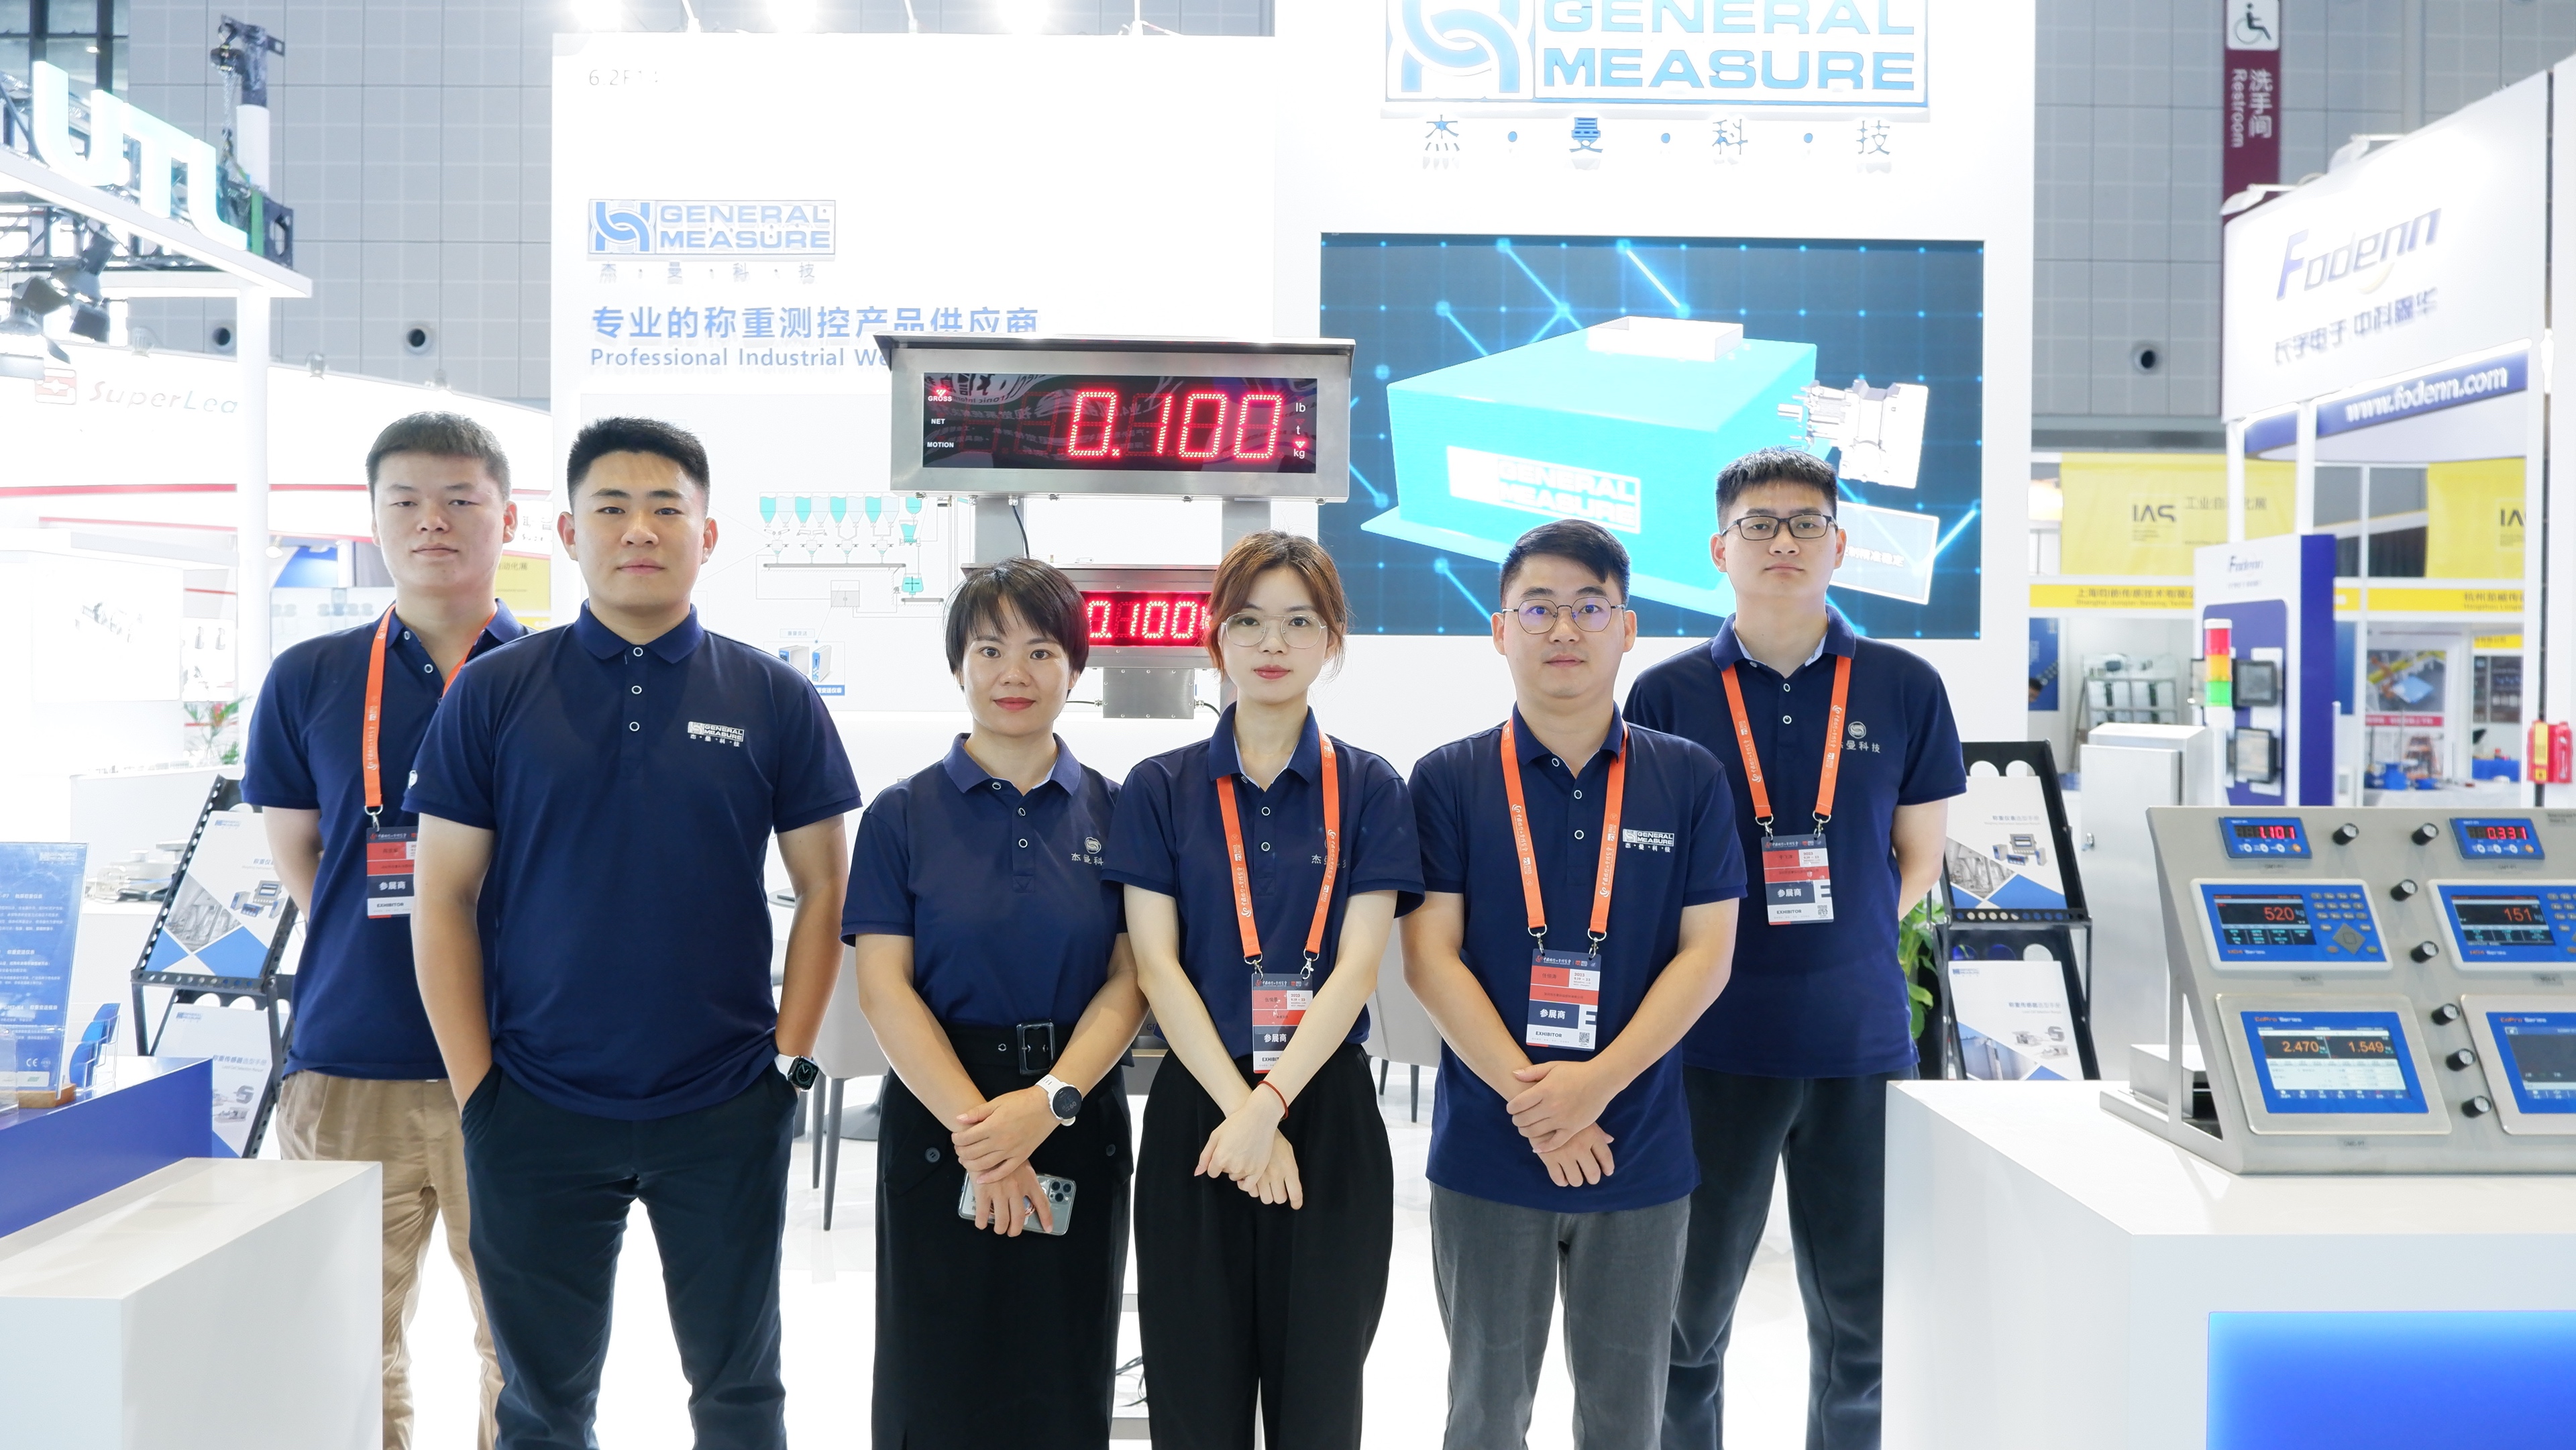 General Measure Participated Industrial Automation Expo